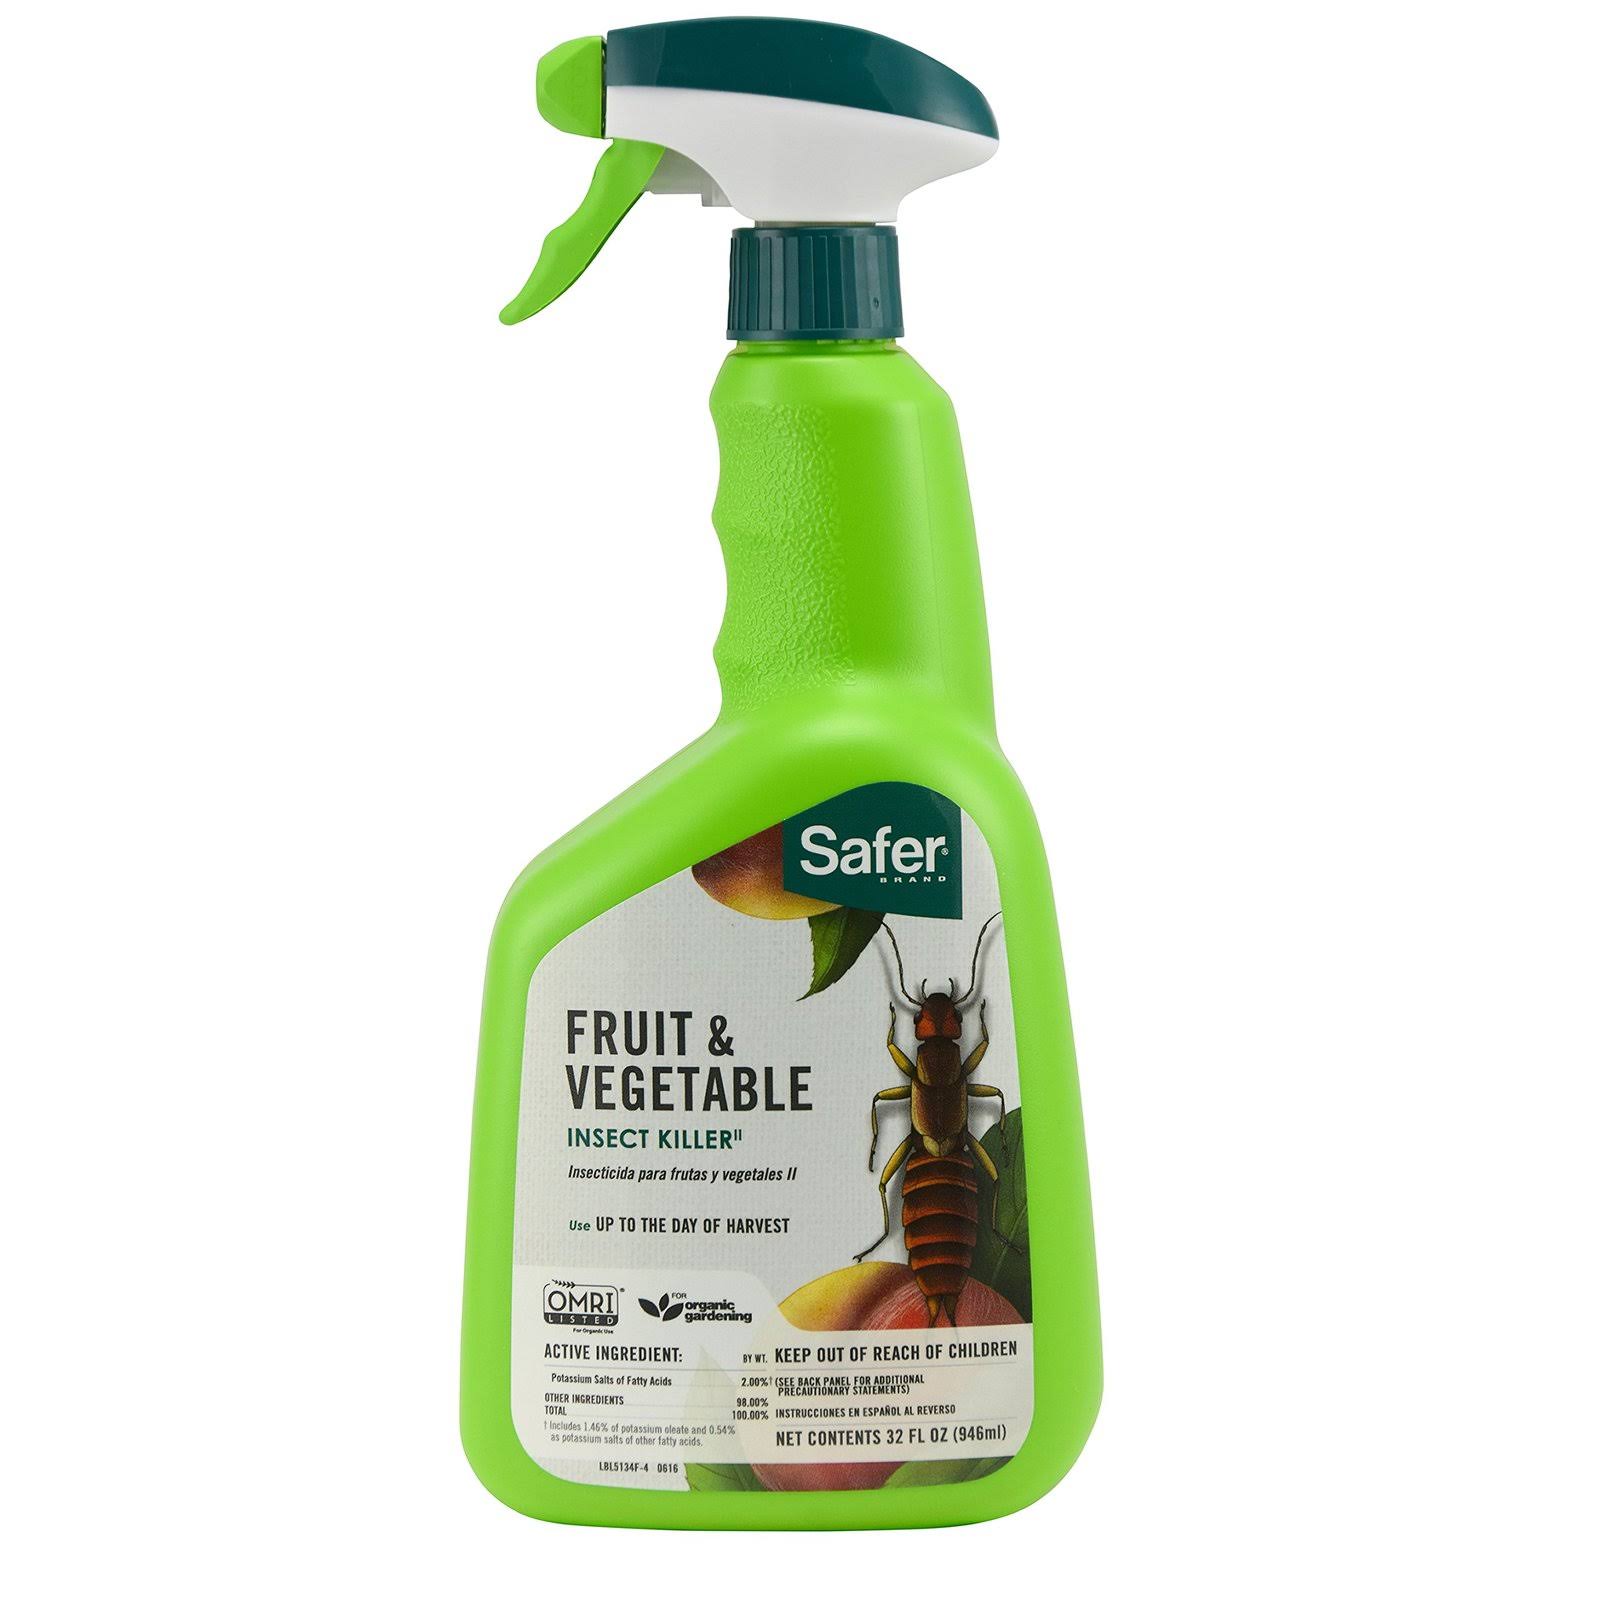 Safer Fruit and Vegetable Insect Killer Spray